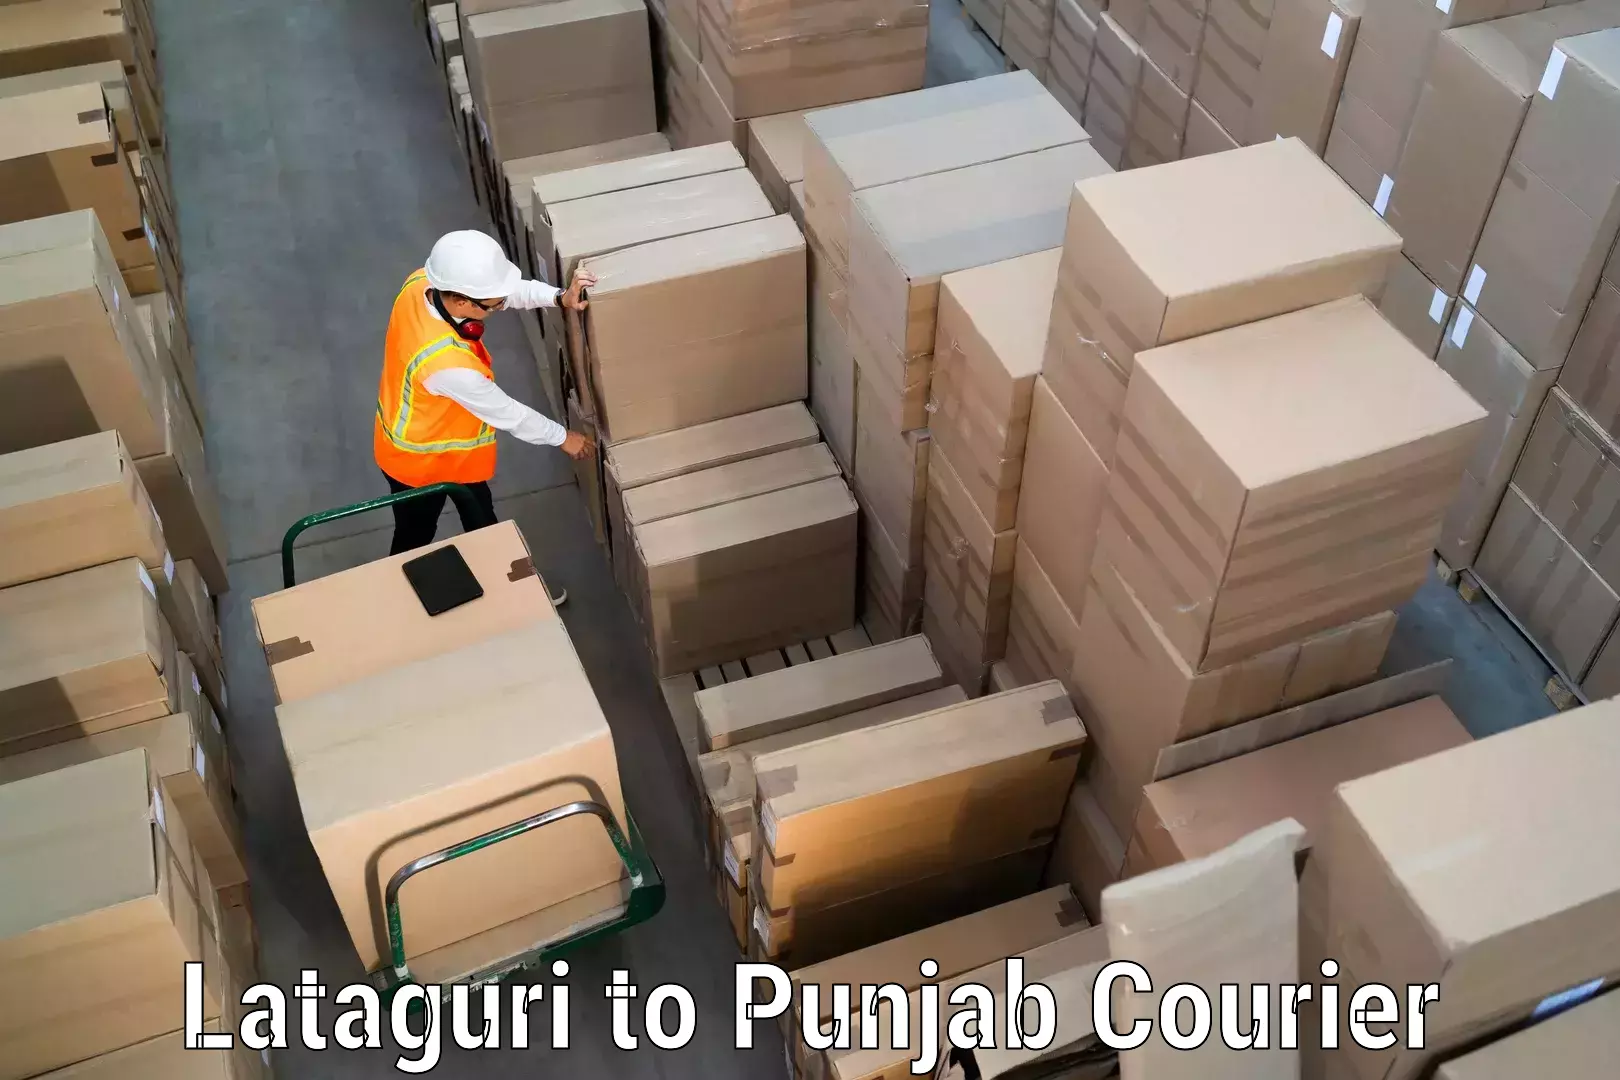 Overnight delivery services Lataguri to Punjab